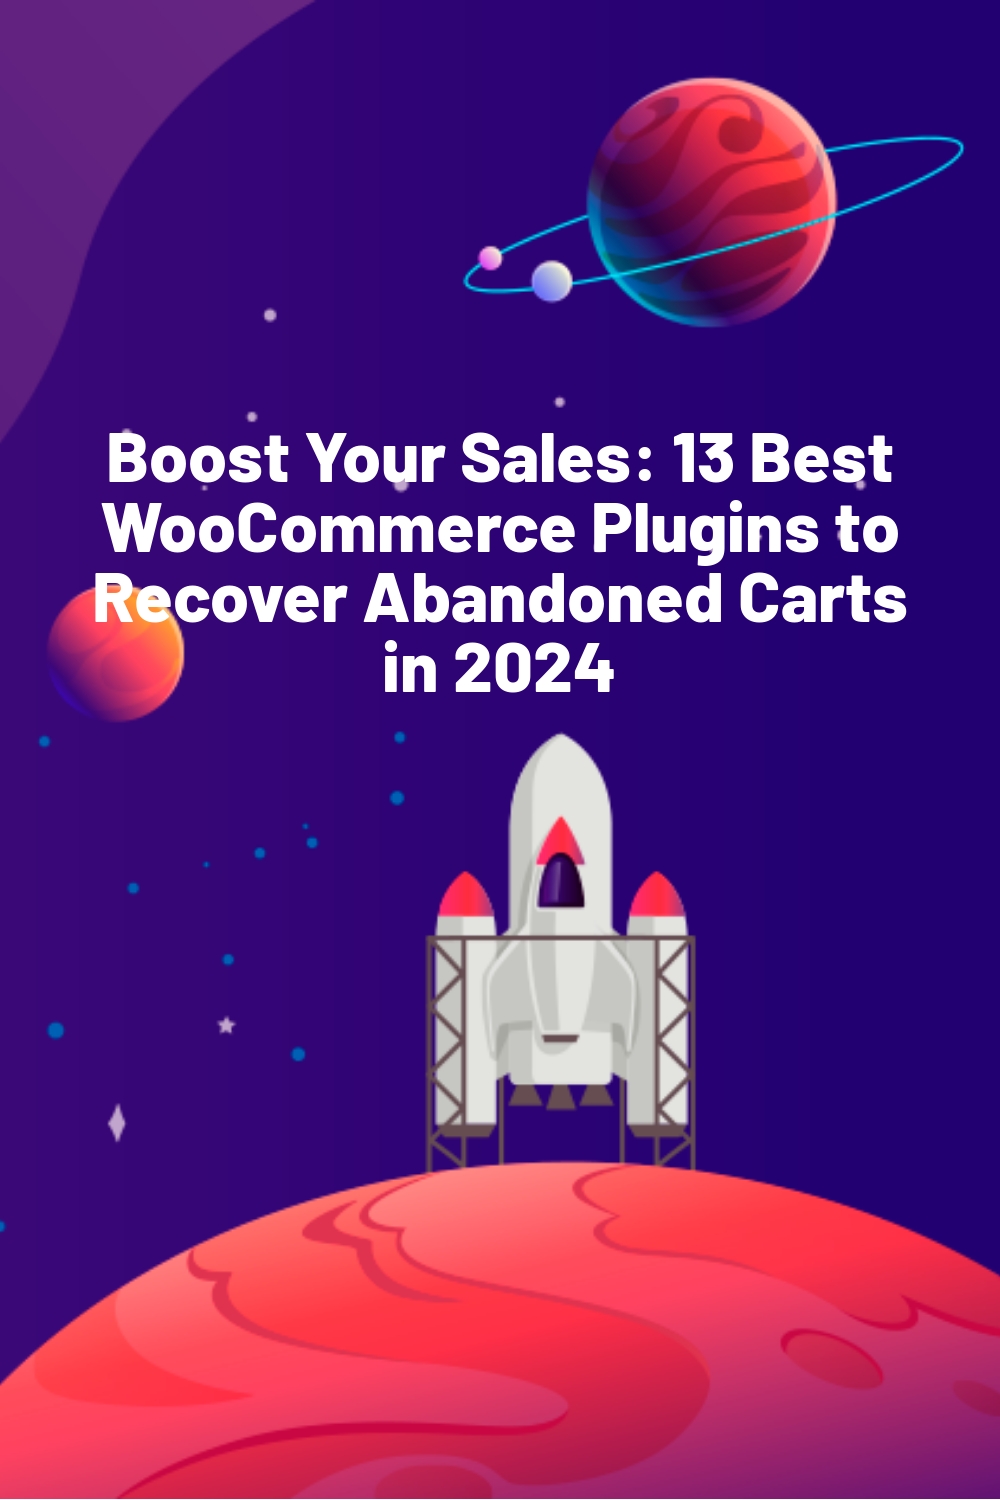 Boost Your Sales: 13 Best WooCommerce Plugins to Recover Abandoned Carts in 2024